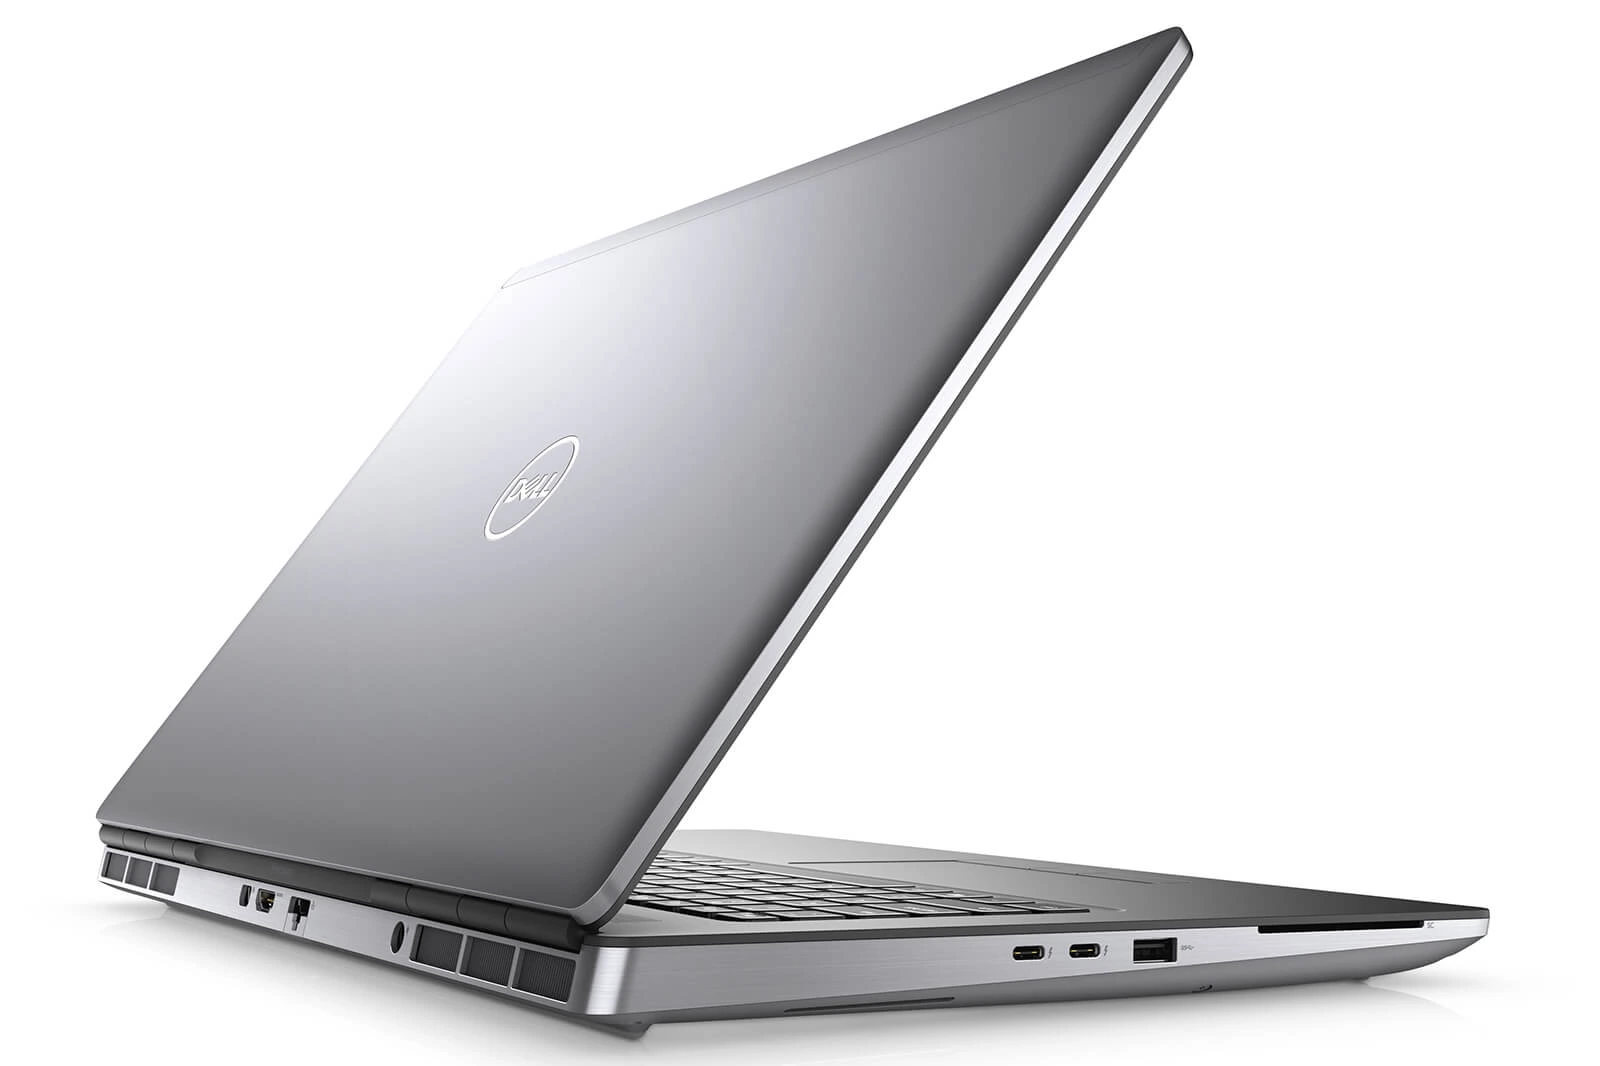 Dell Precision 7760 Mobile Workstation Features 02